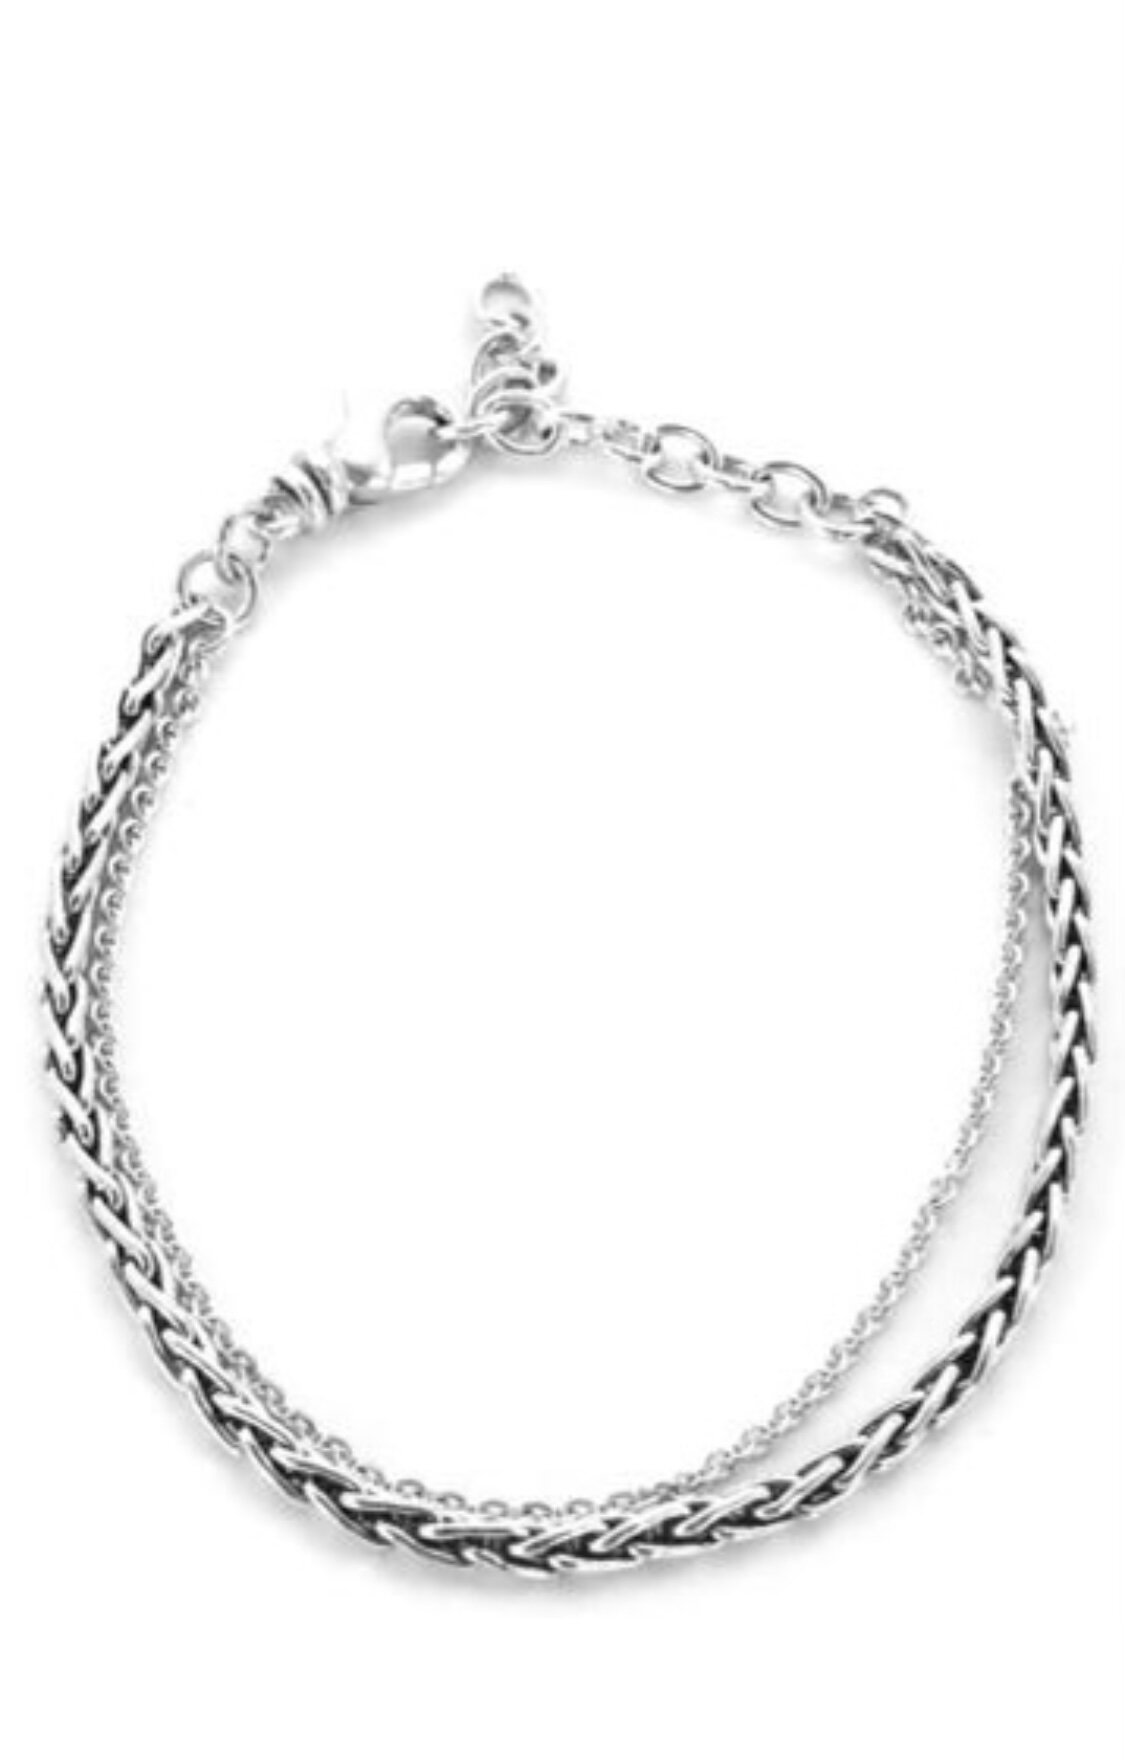 Buy JewelYaari™ Pure 925 Sterling Silver Italian Curb Bracelet for Men  womens, girls, and boys 8.5 Inches(10 Gm) at Amazon.in